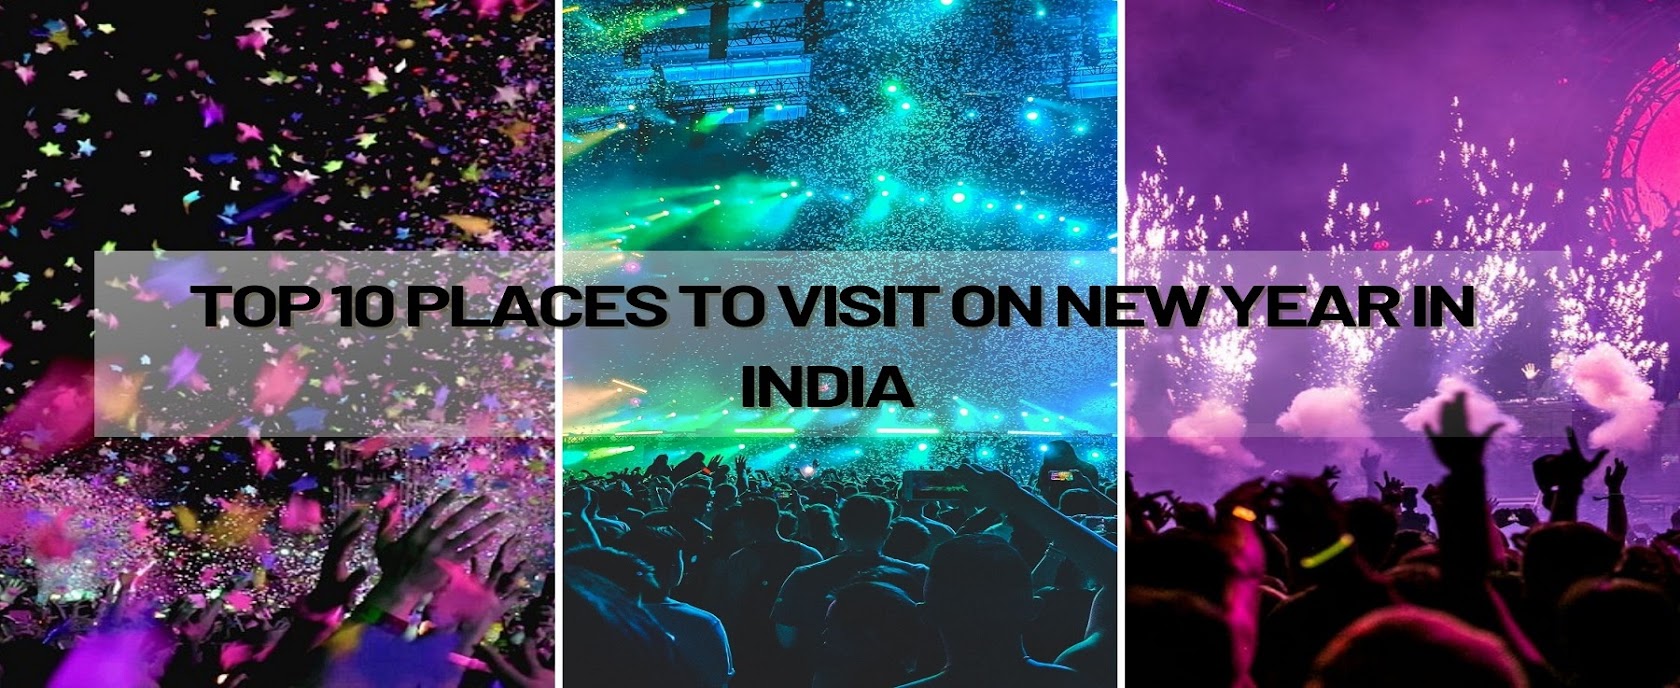 Top 10 Places To Visit On New Year In India